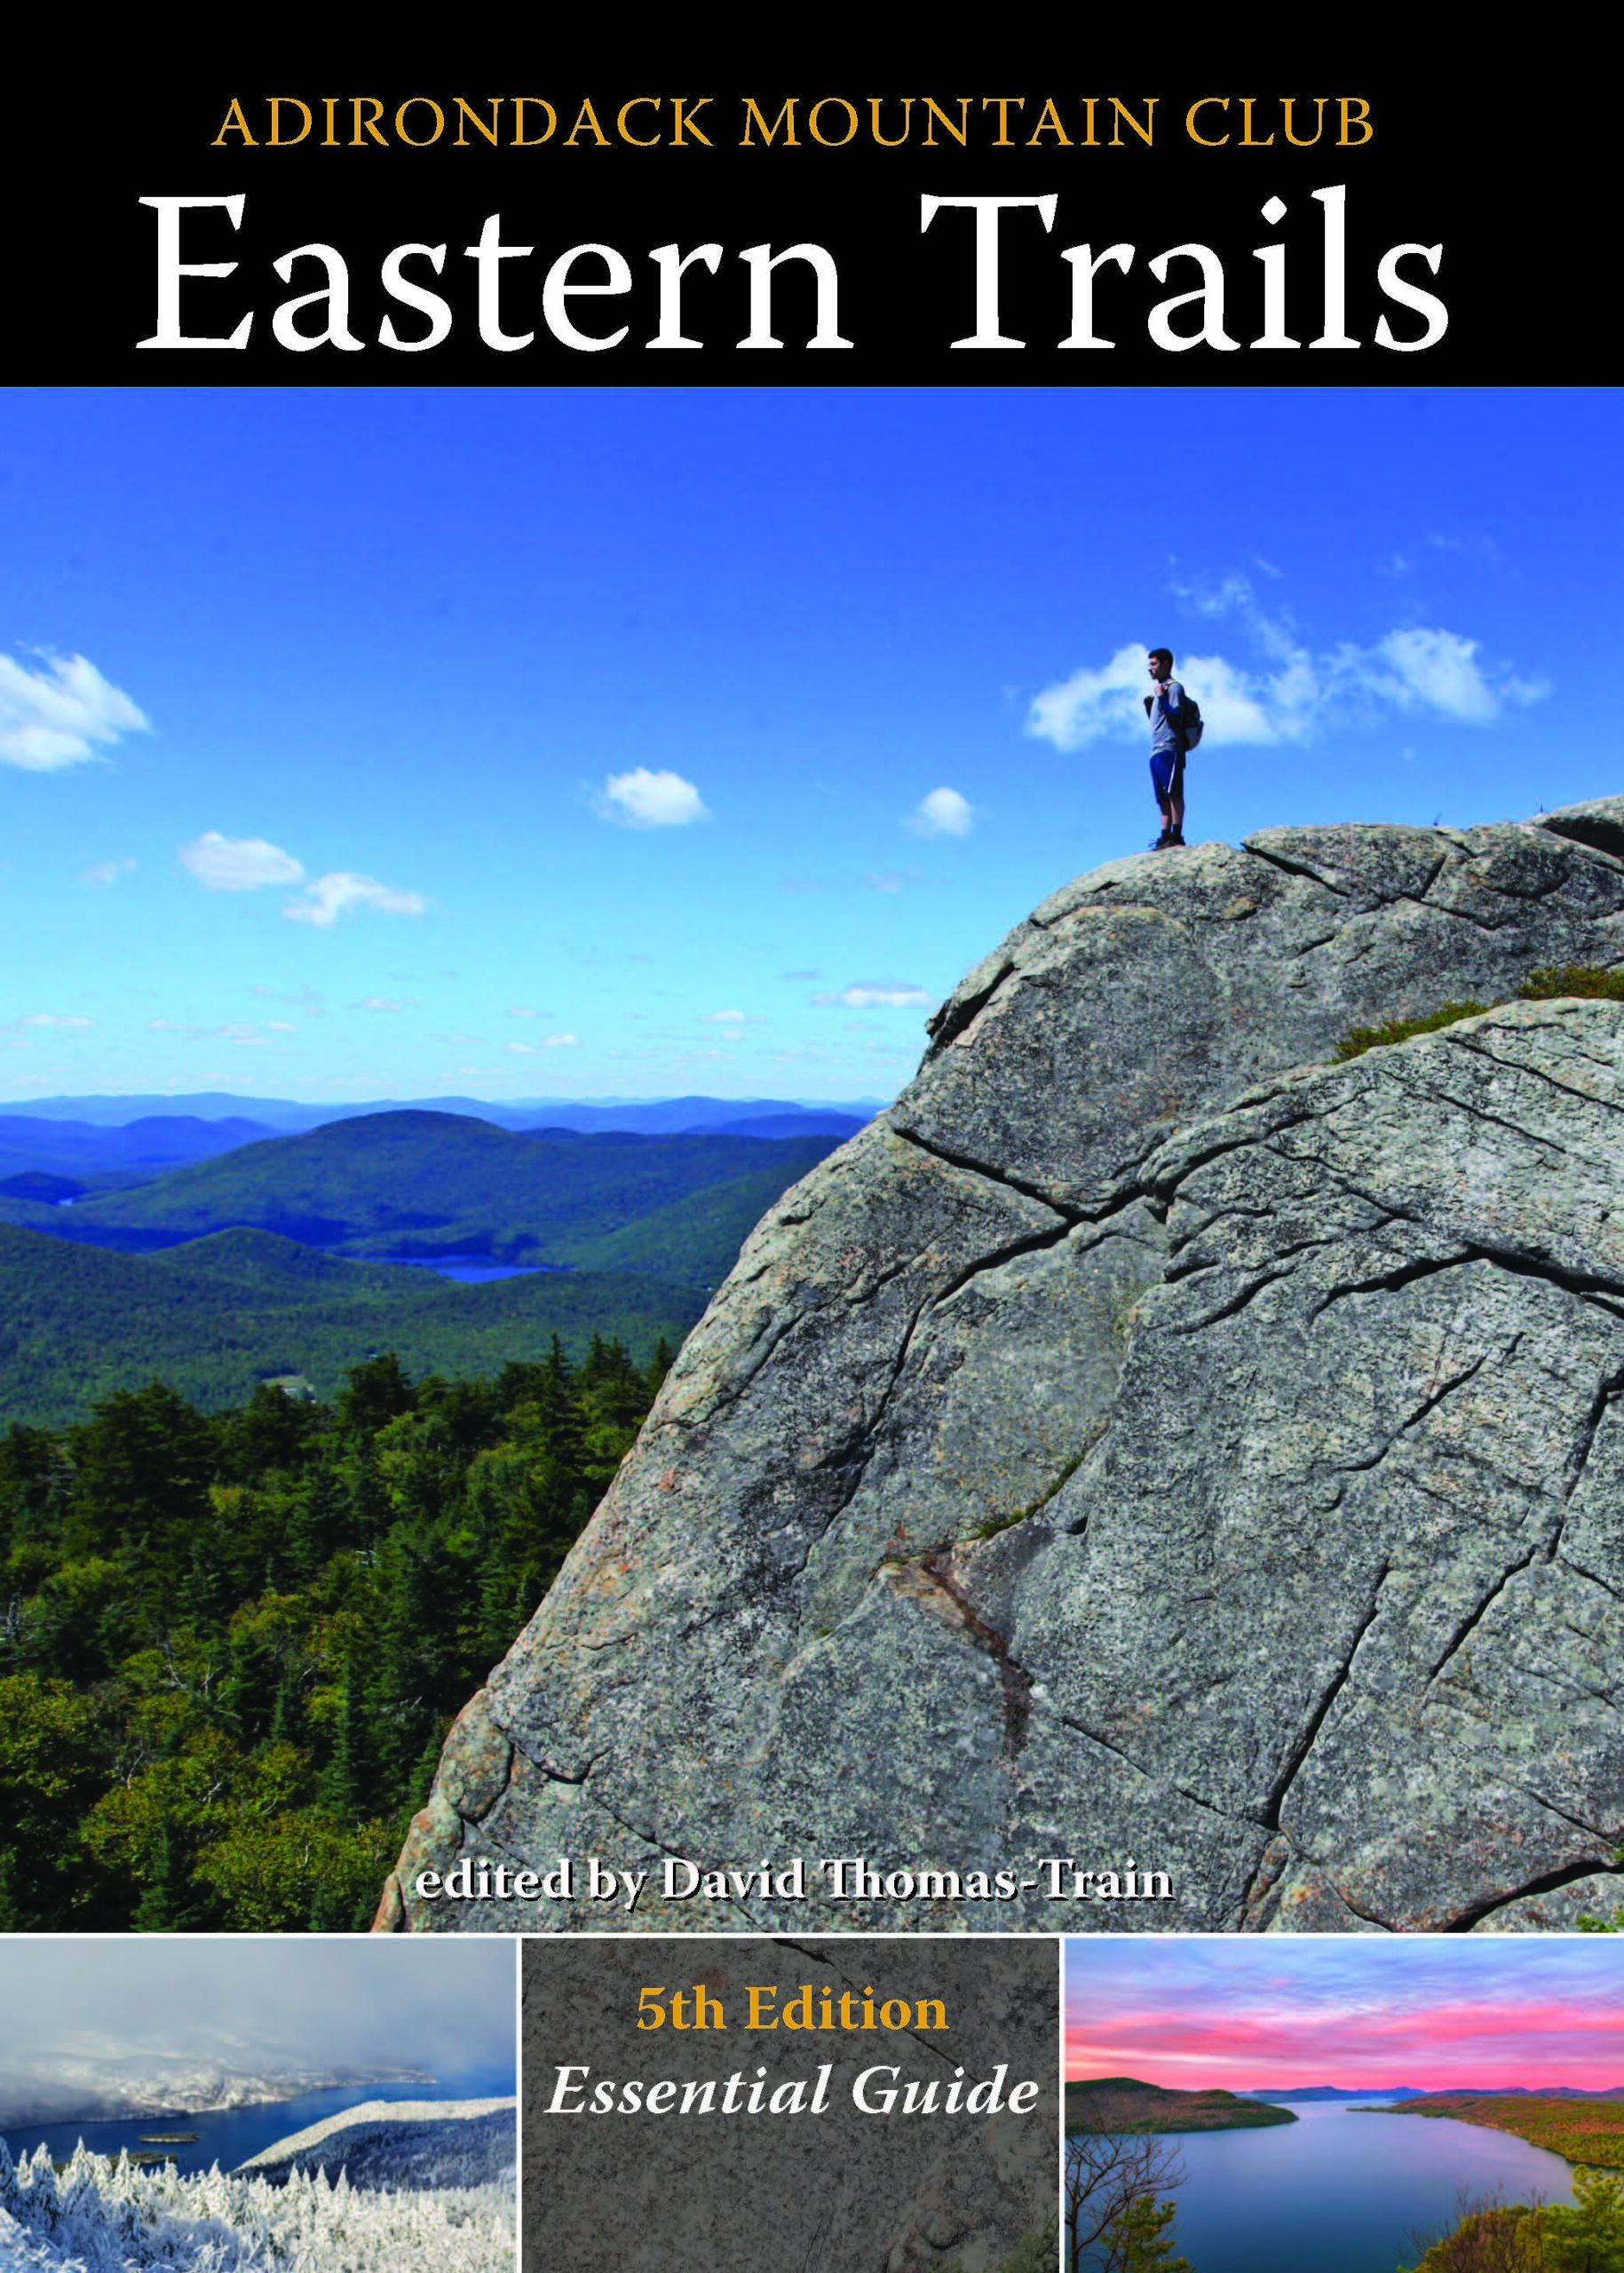 ADK Eastern Trails guide book